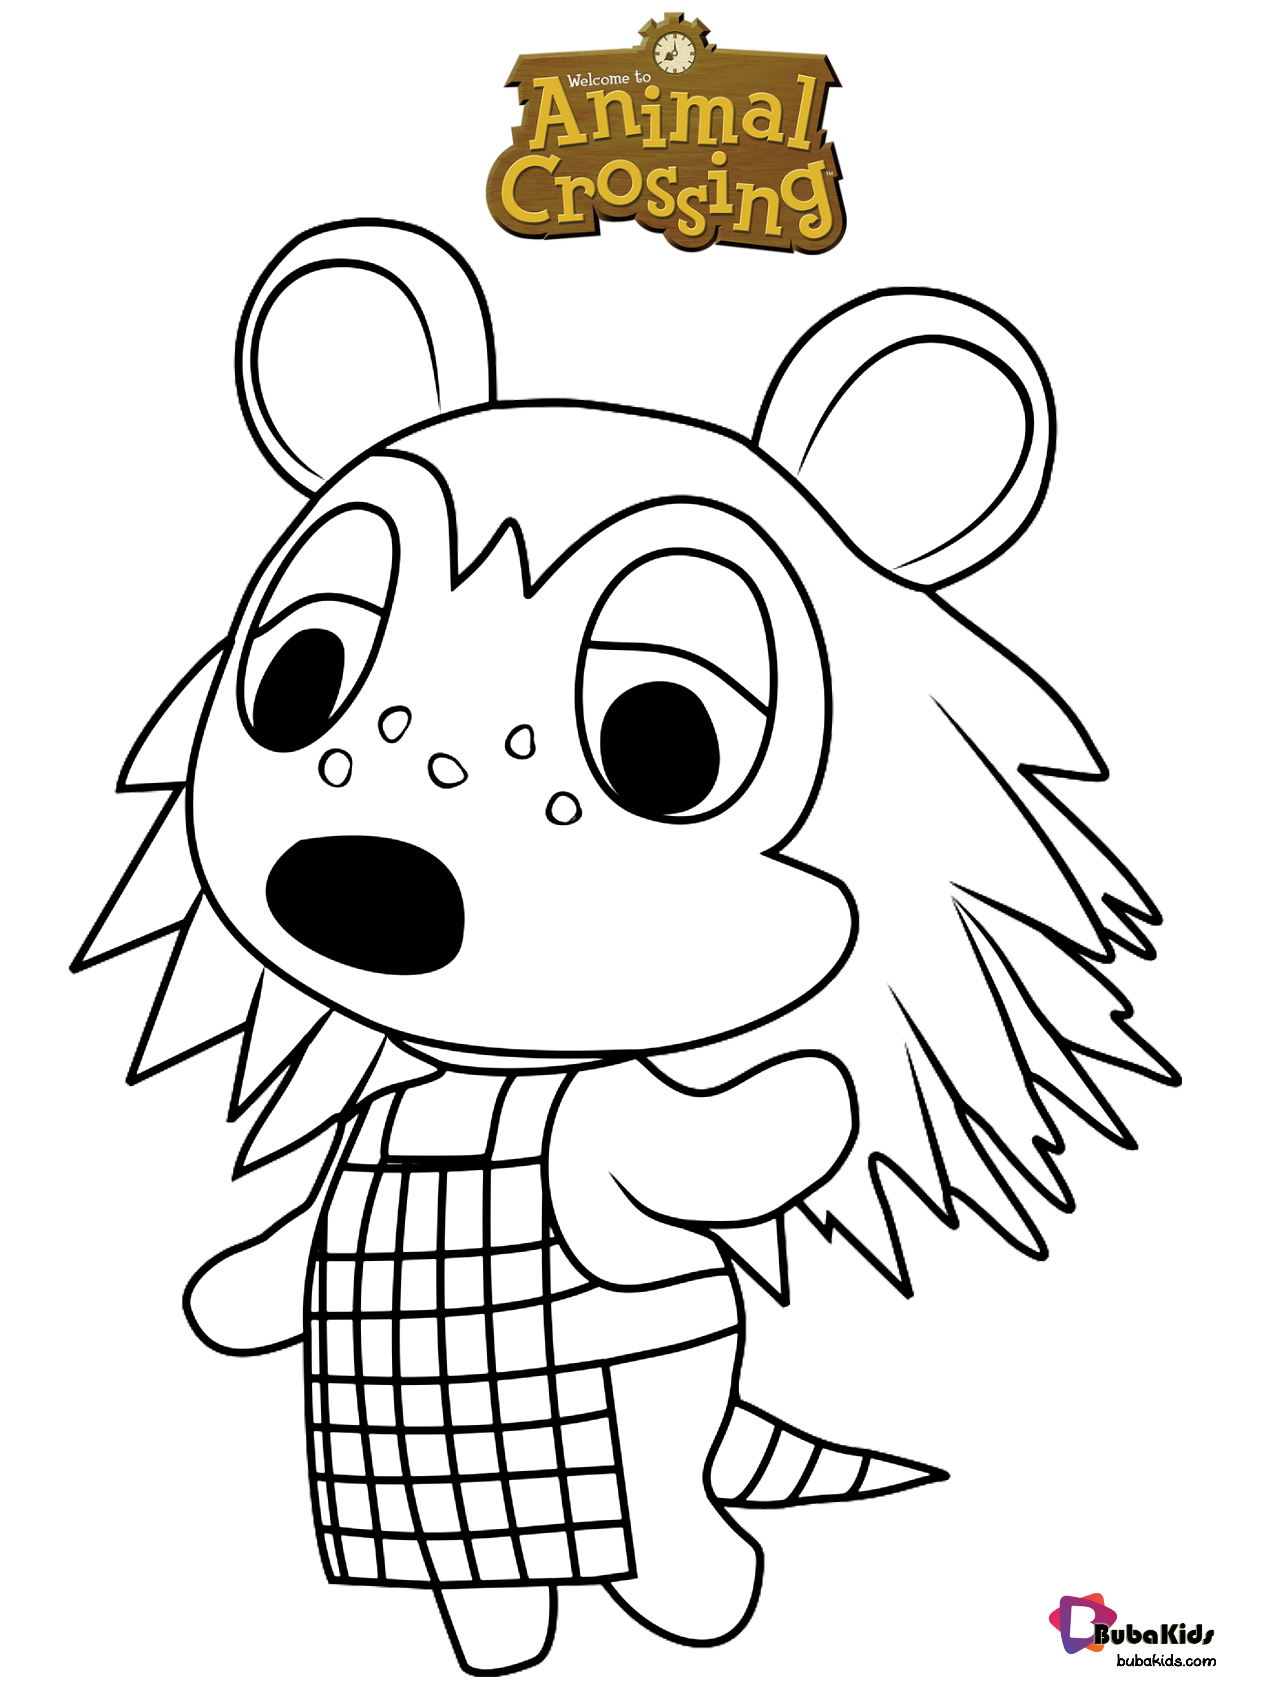 Sable Animal Crossing Coloring Page for kids Wallpaper